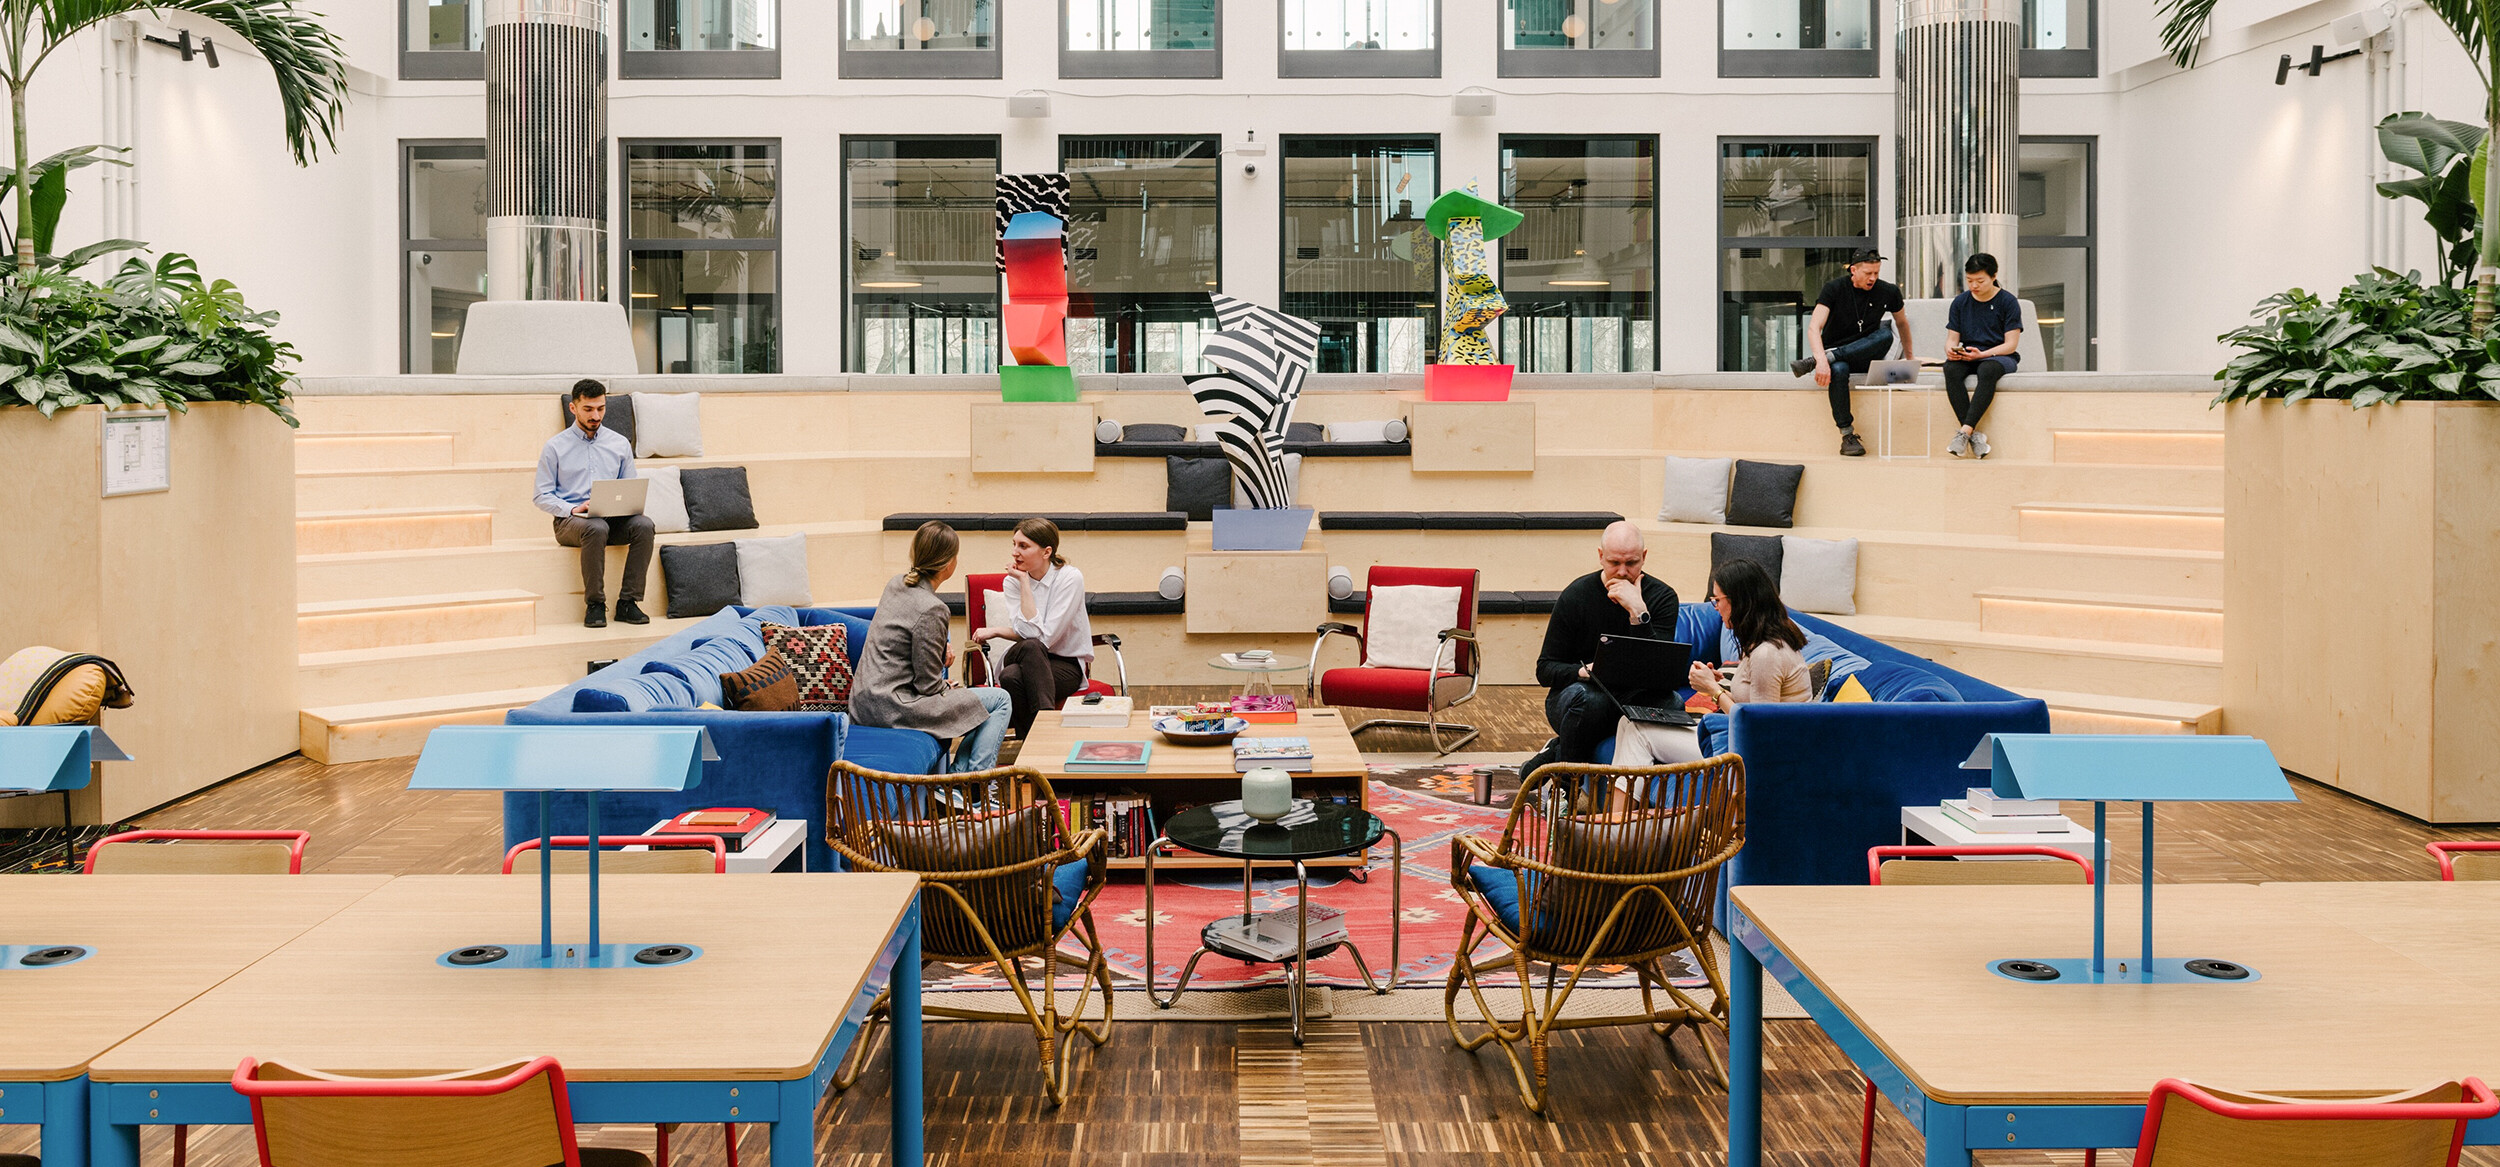 Berlin has an abundance of shared offices and coworking spaces